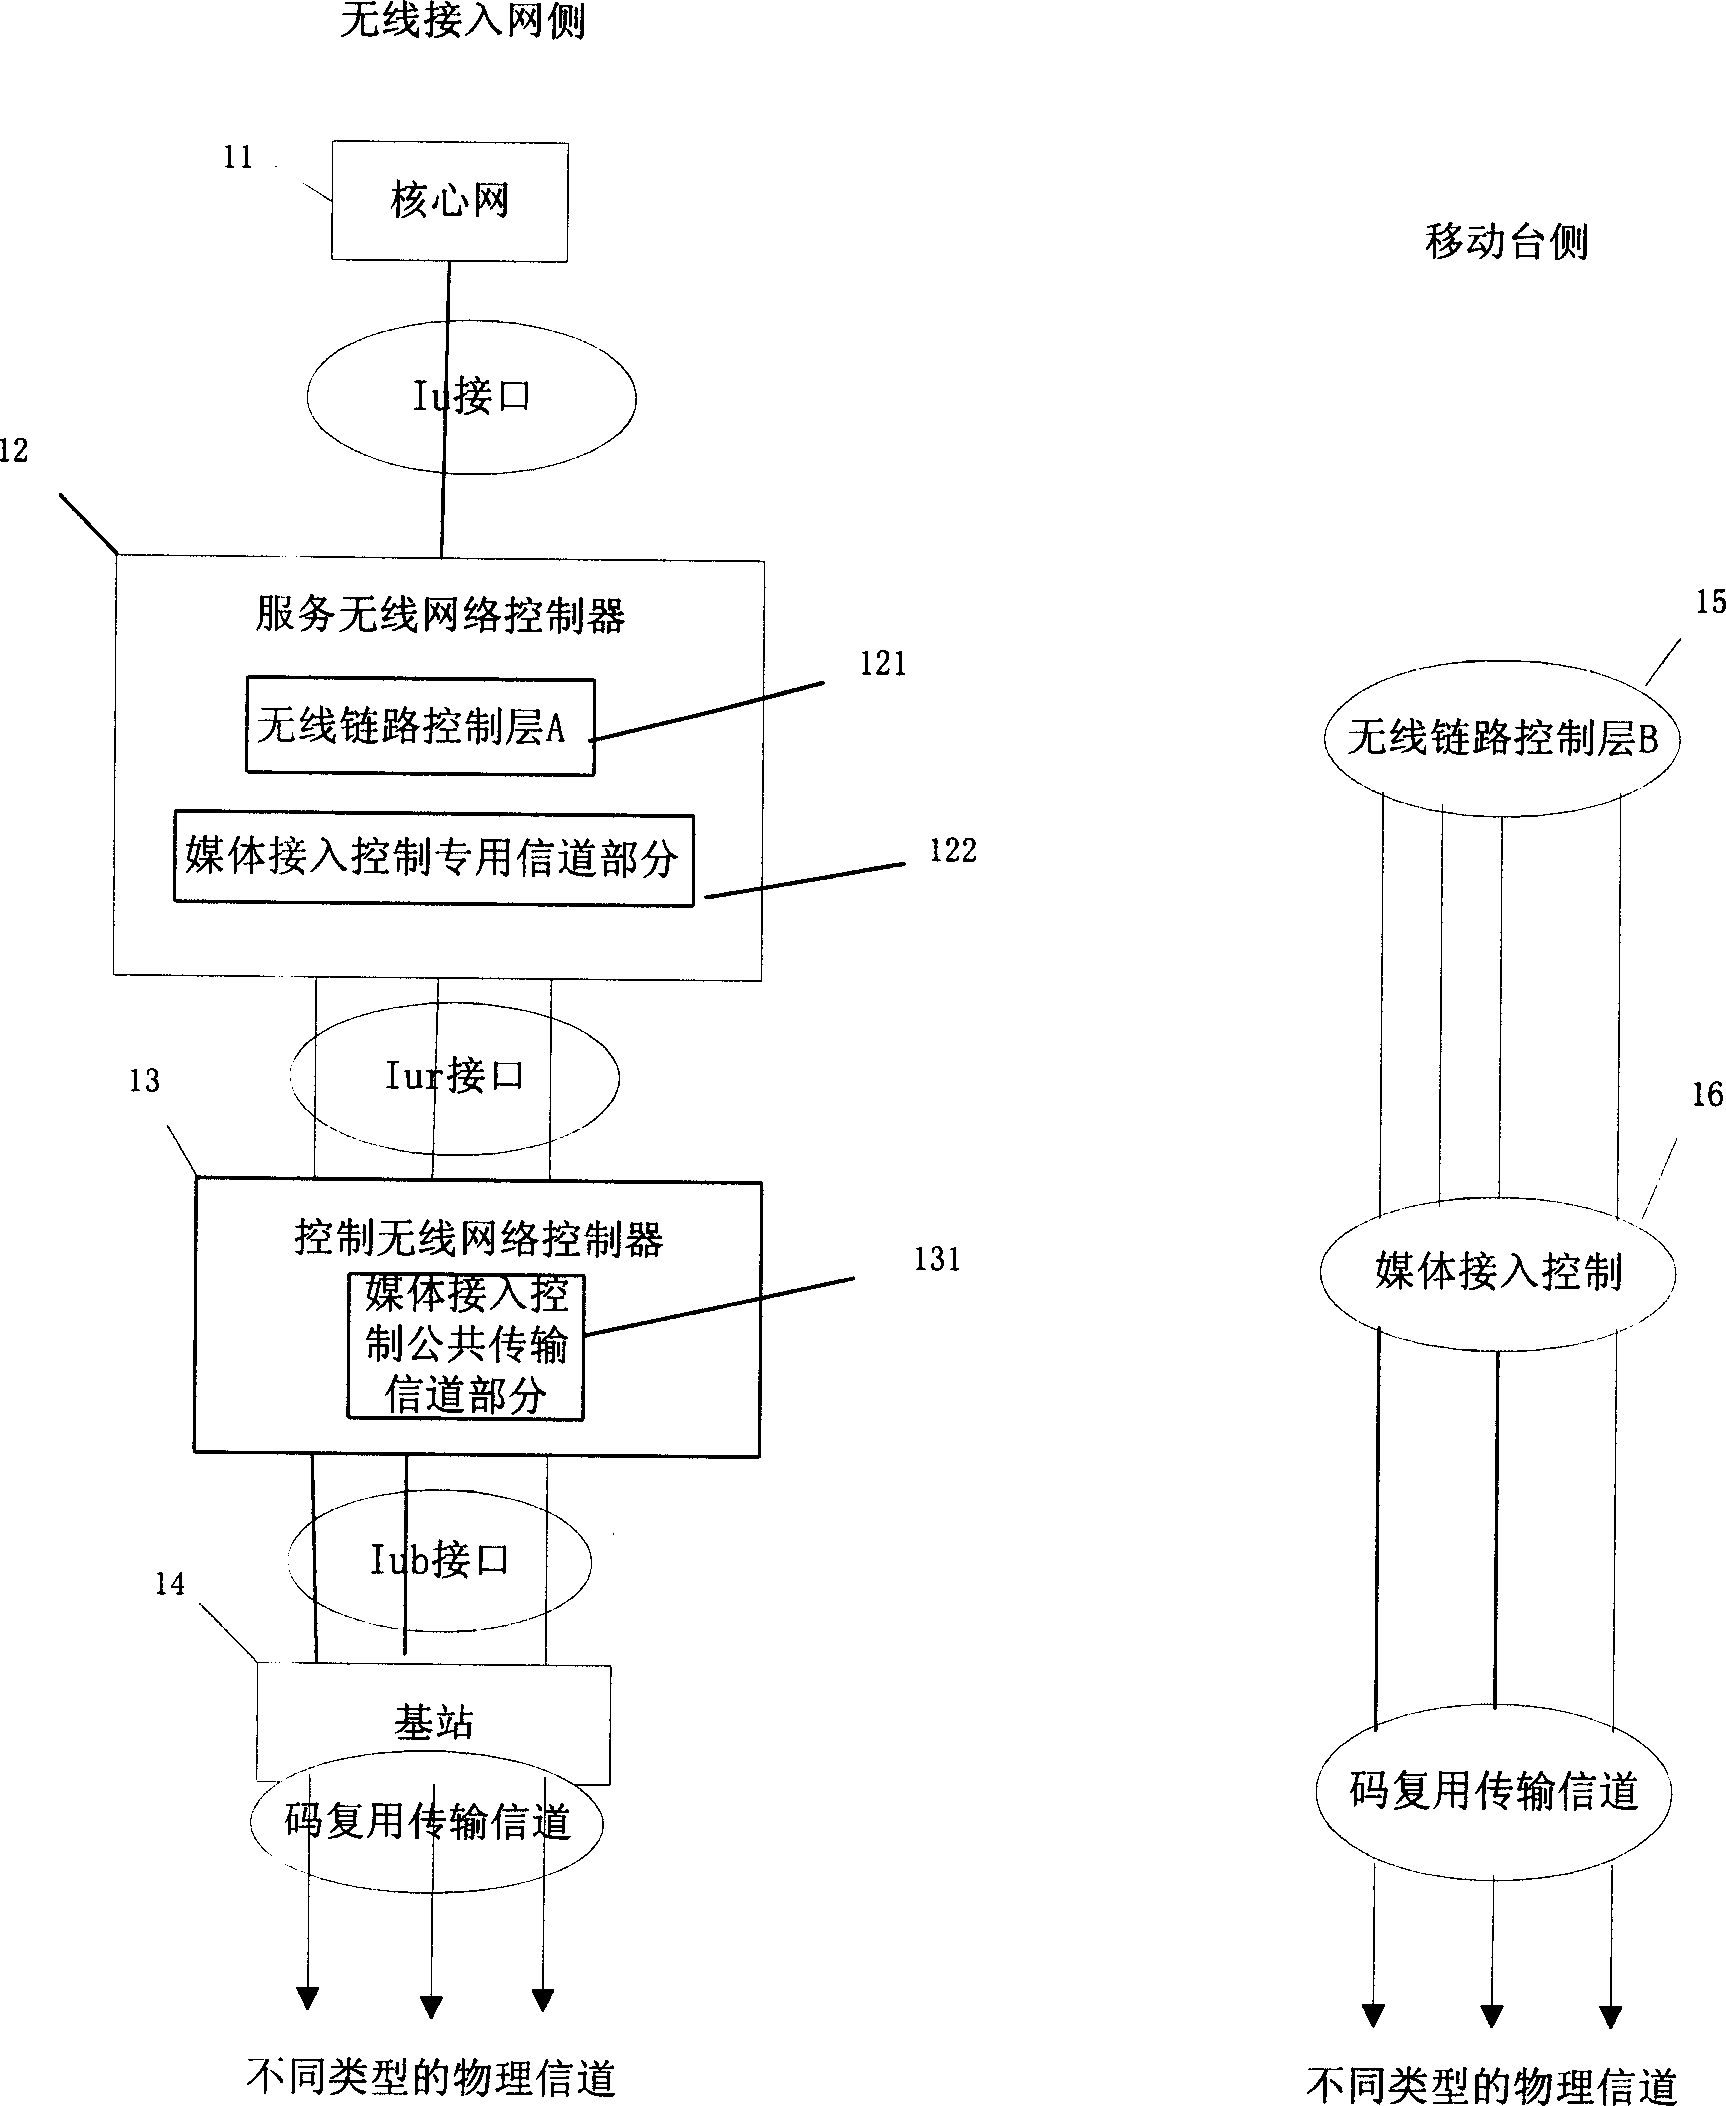 High-speed down data packet accessing system support method to different service quality business